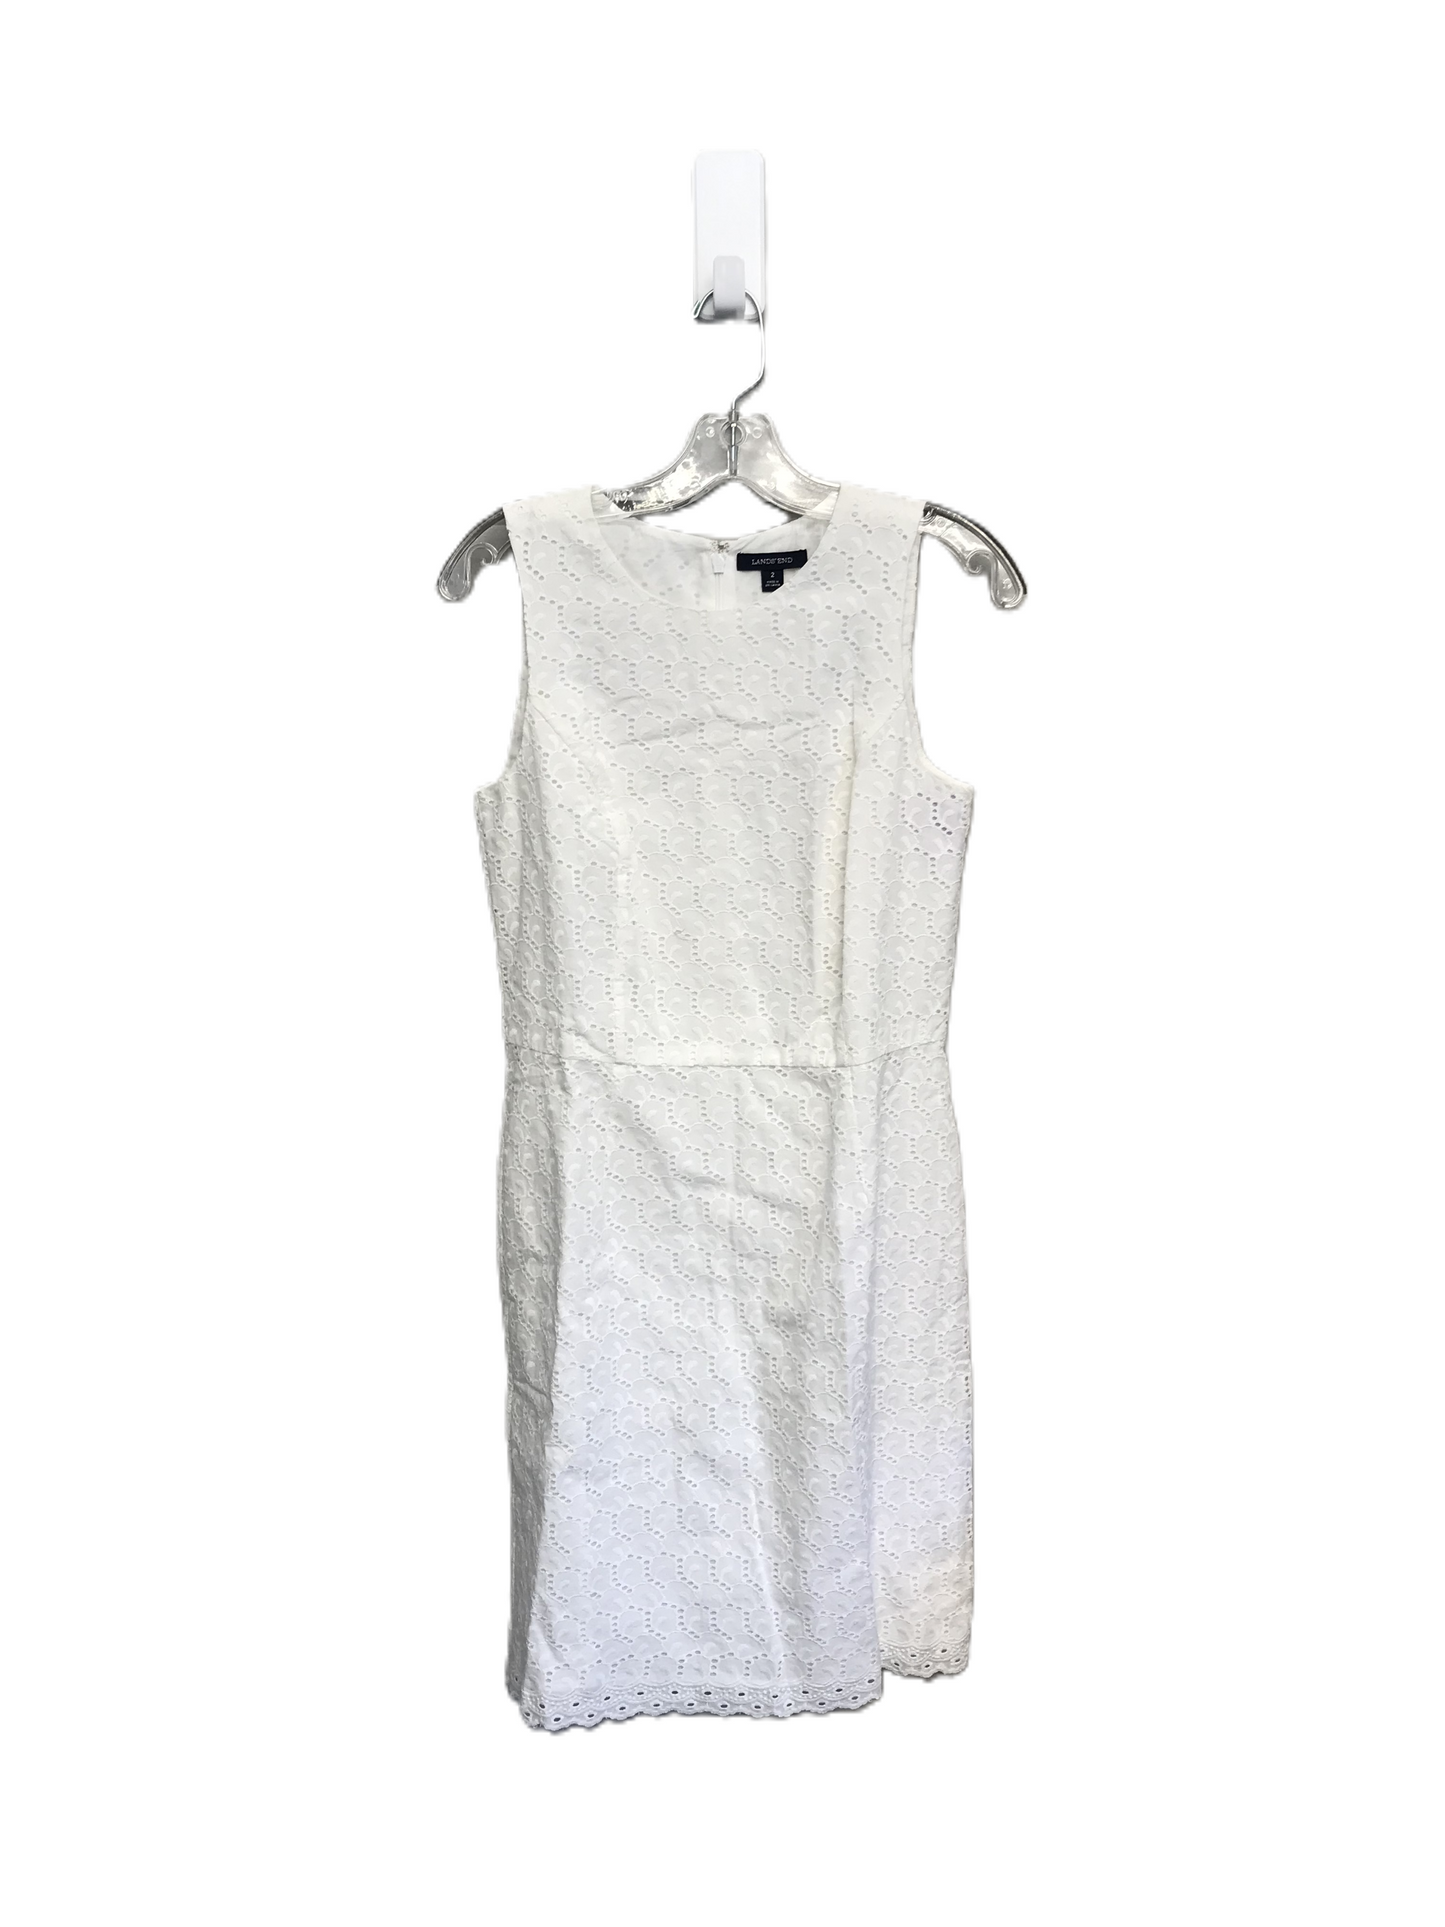 White Dress Casual Short By Lands End, Size: Xs